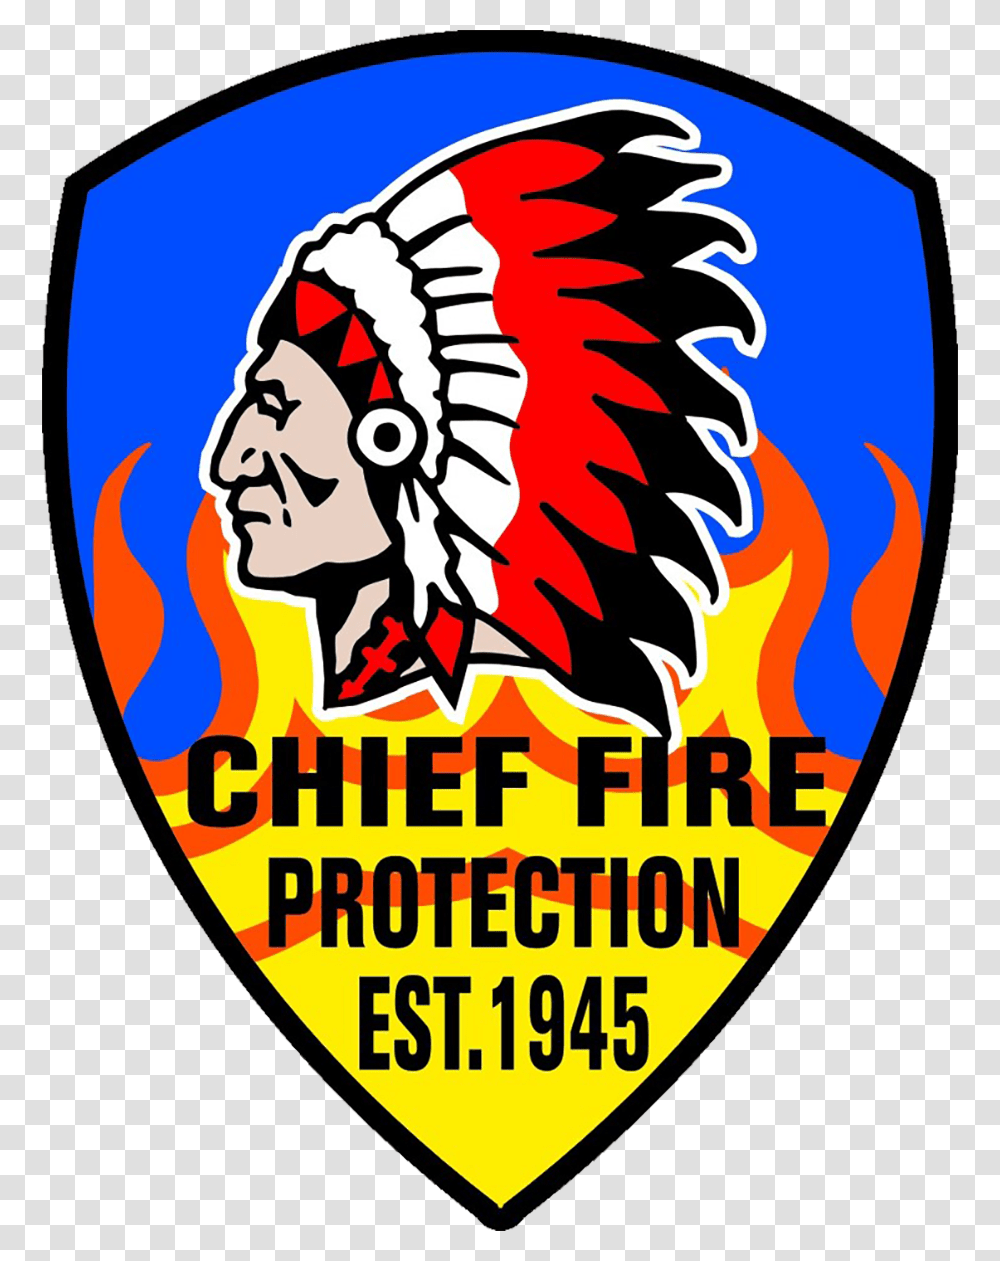 Chief Fire Protection Company Emblem, Poster, Advertisement, Logo Transparent Png